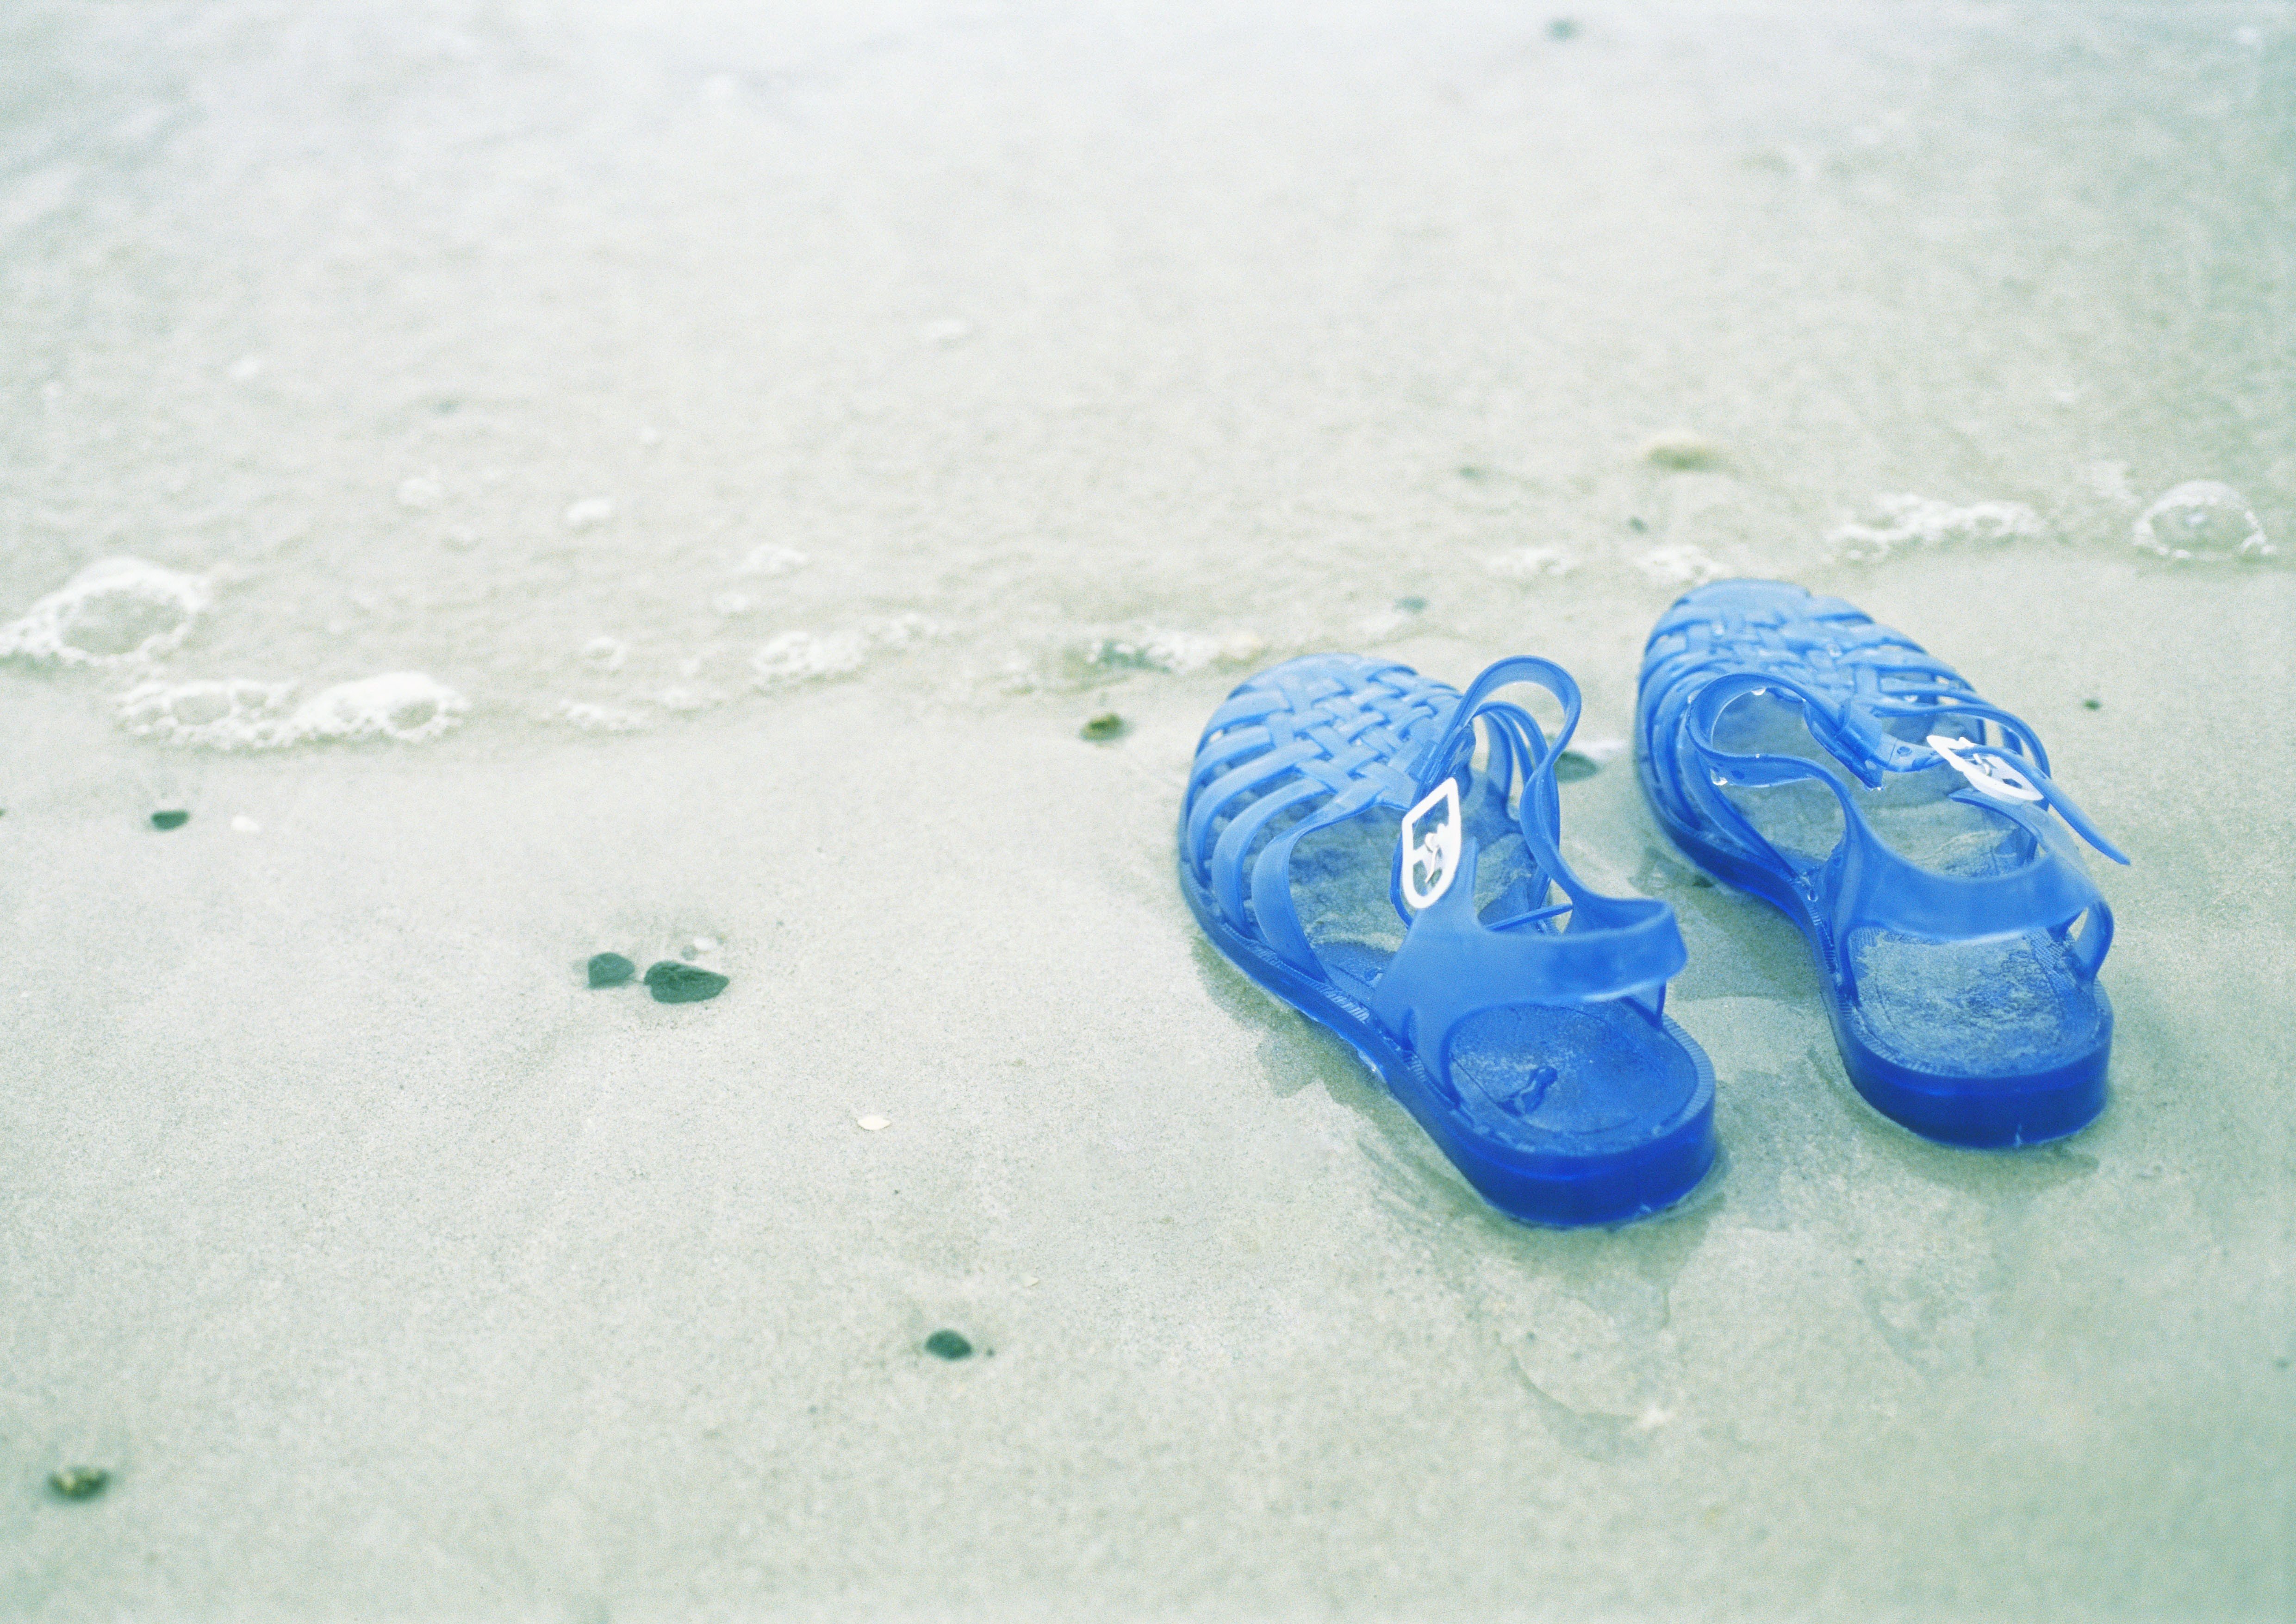 plastic water shoes